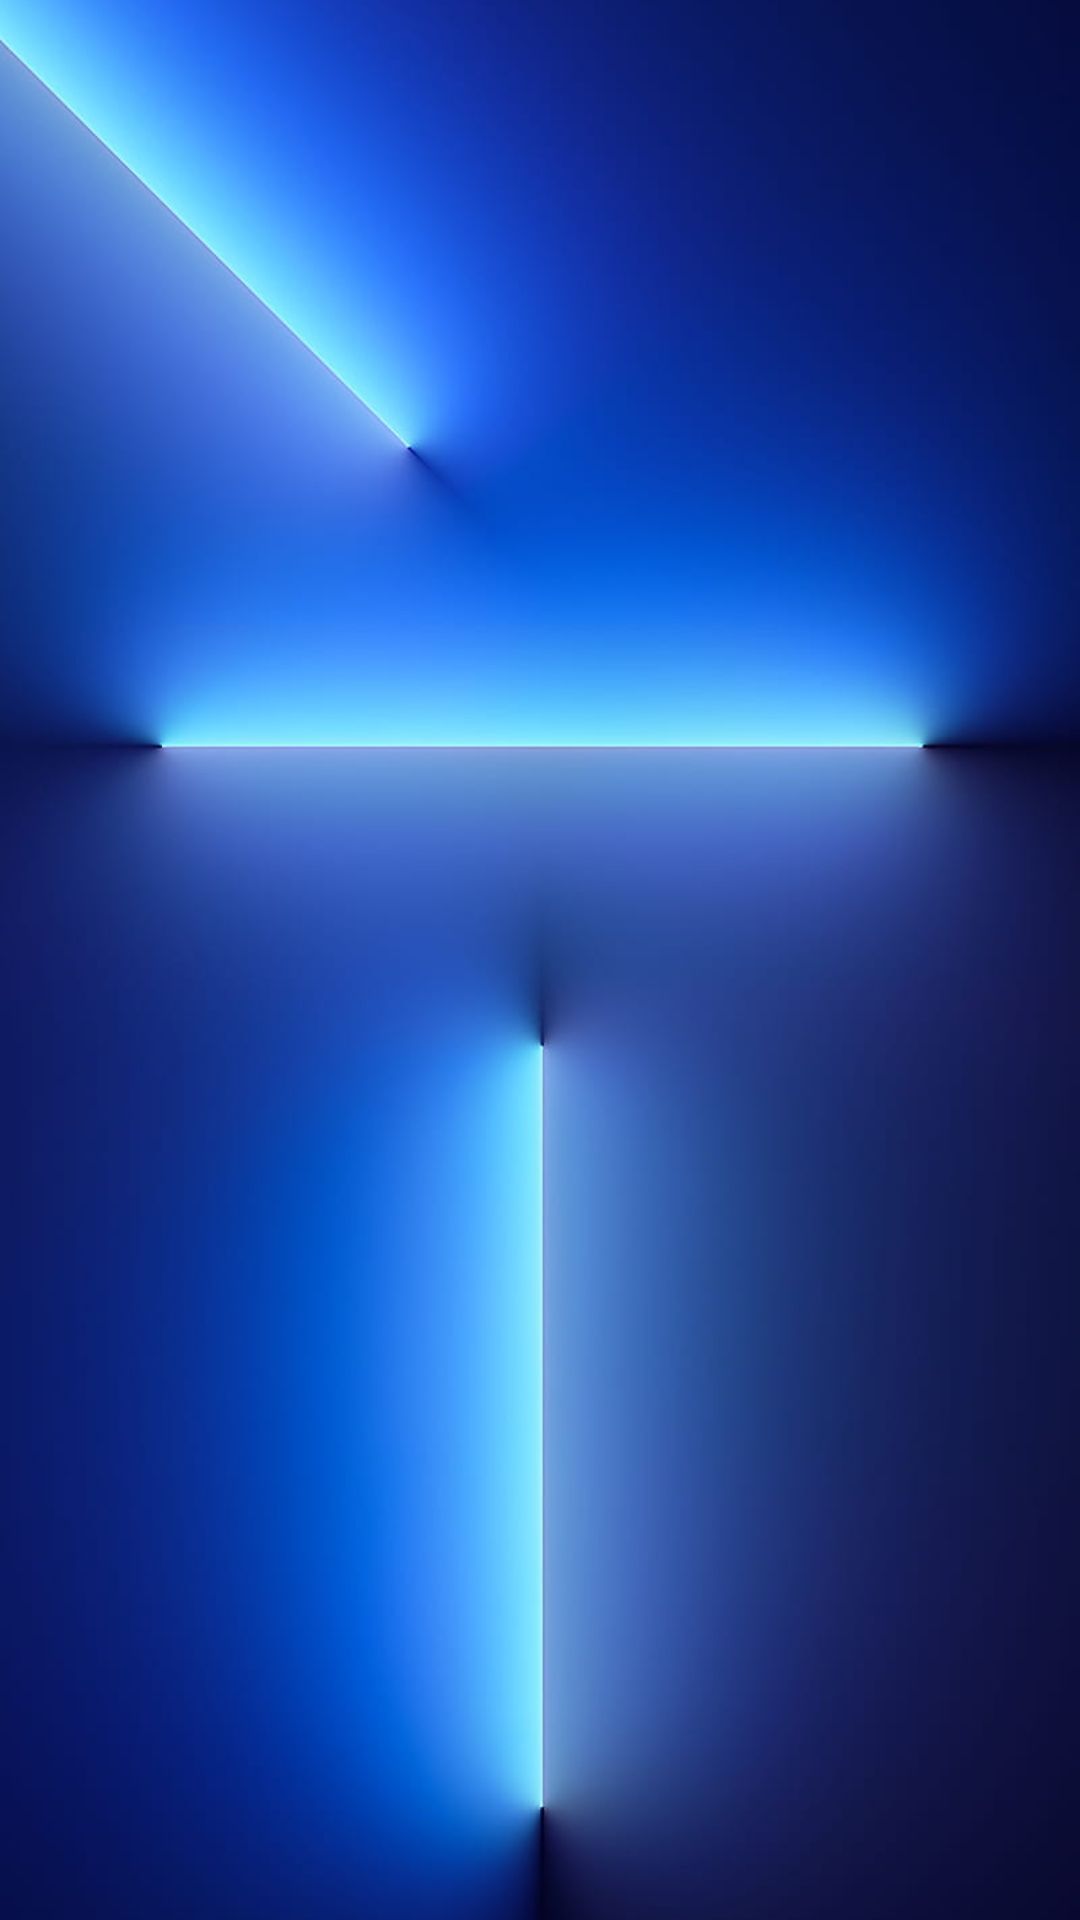 A blue light with two lines in the middle - Light blue, dark blue, dark phone, neon blue, navy blue